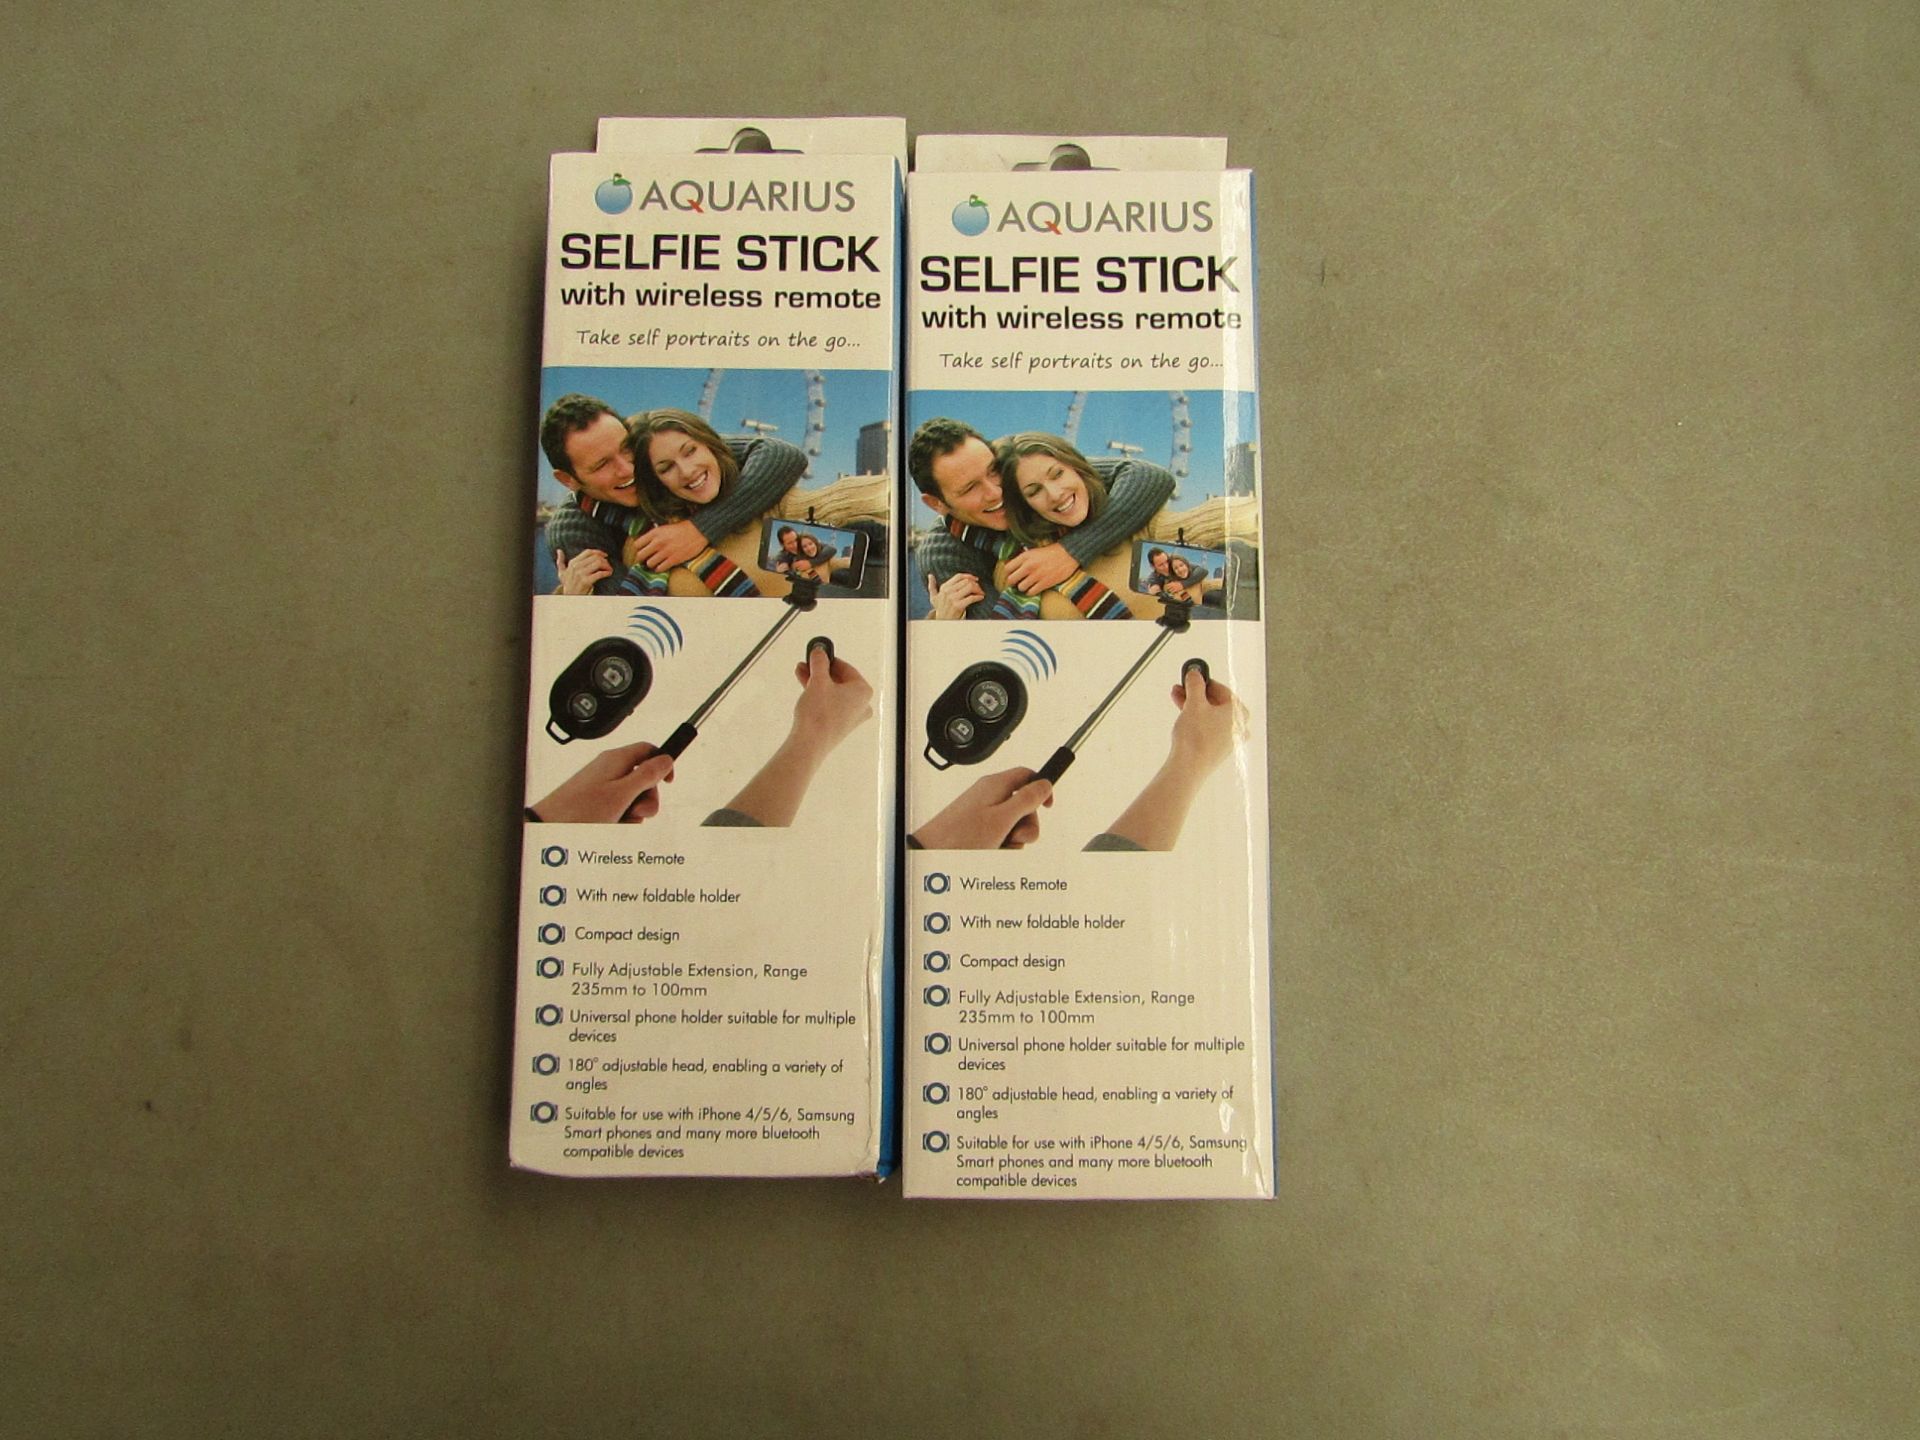 2x Aqaurius Selfie Sticks with wireless remote control, new and boxed, RRP £6.99 each